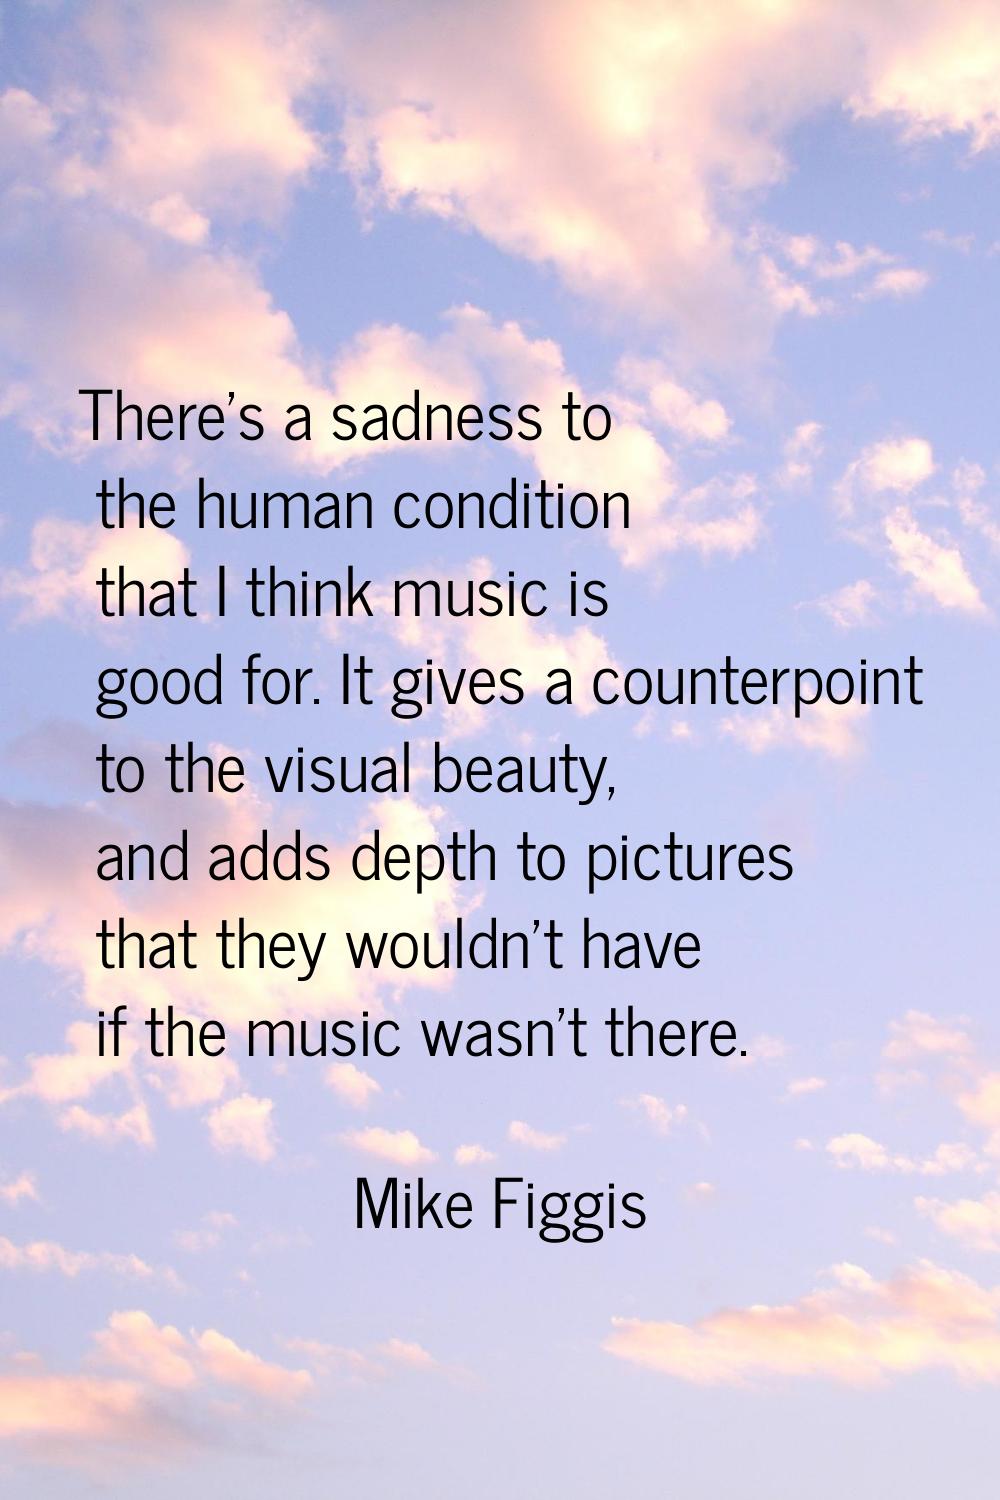 There's a sadness to the human condition that I think music is good for. It gives a counterpoint to